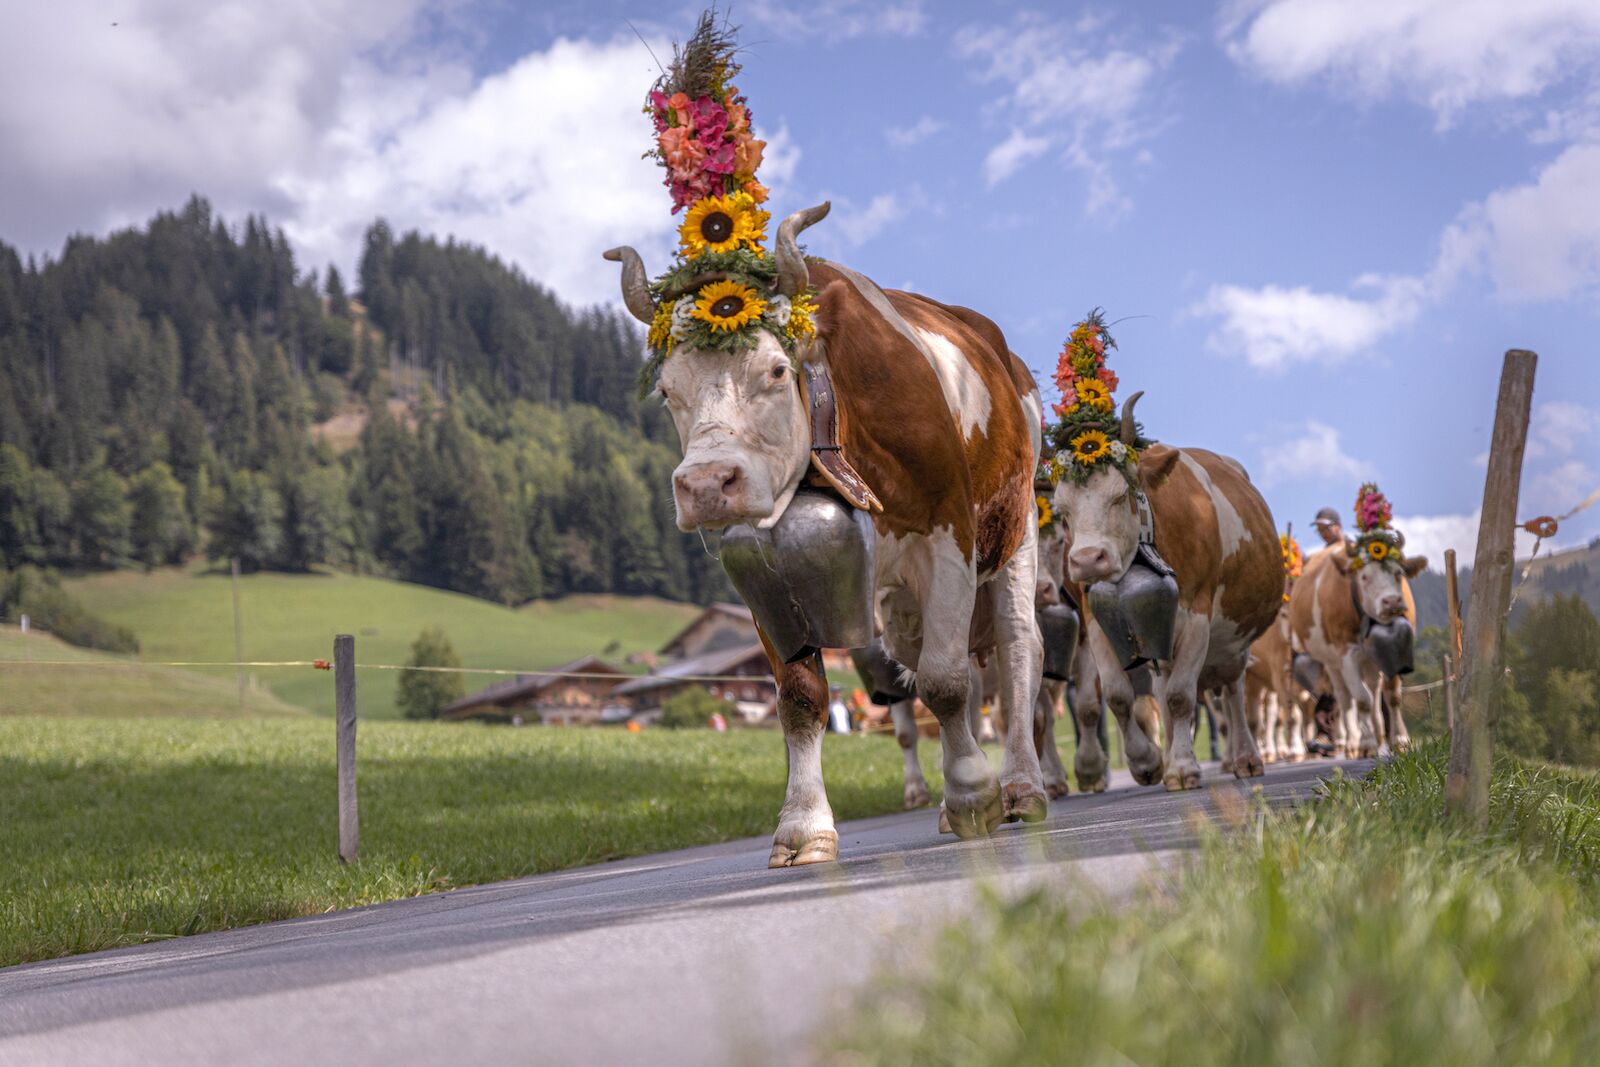 Switzerland Cow Festival: The Best Places To See the Swiss Cow Parades